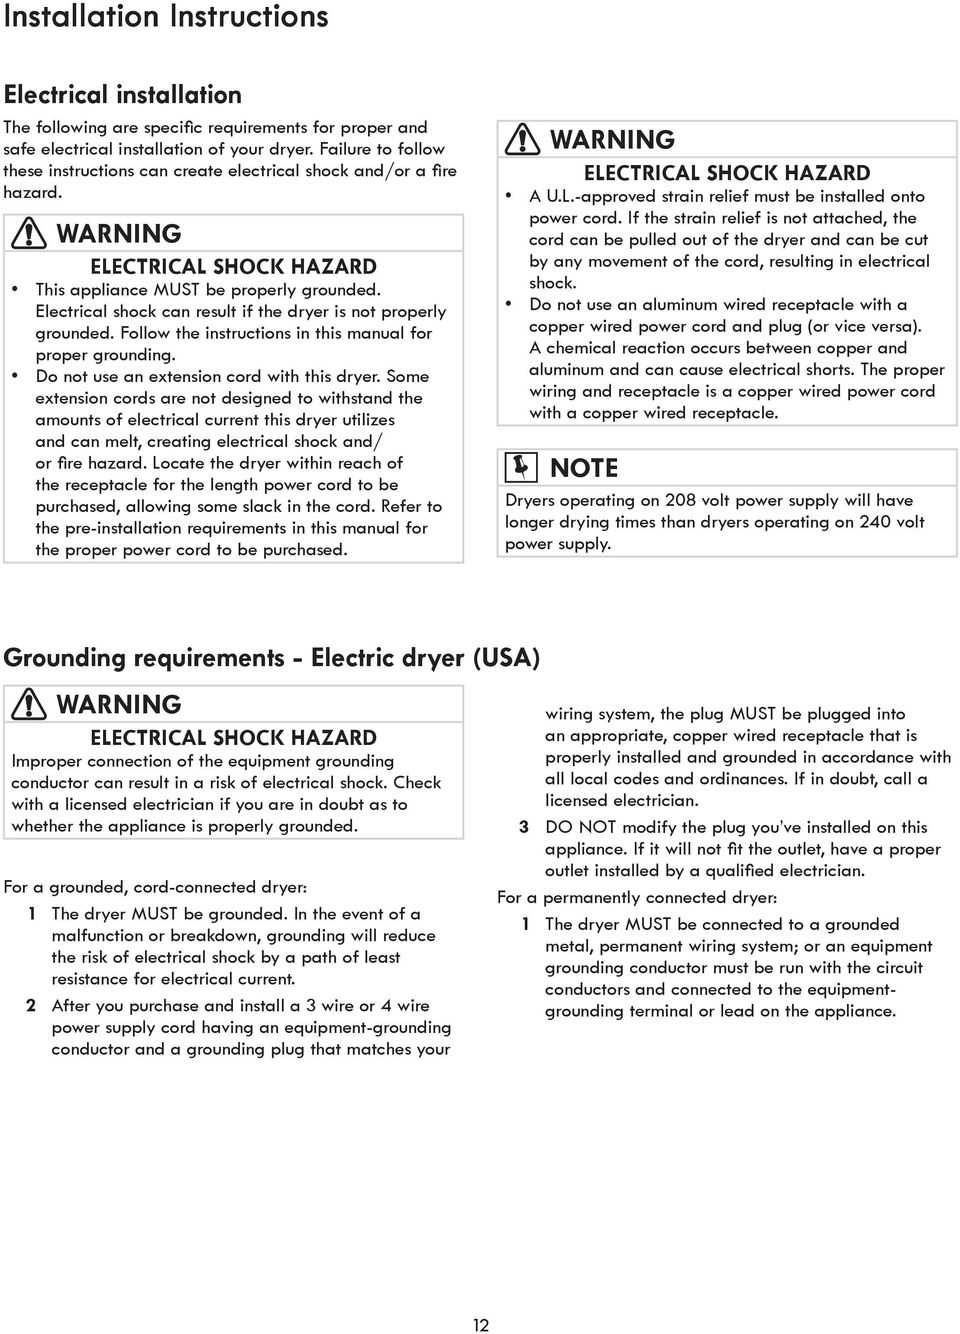 Electrical shock can result if the dryer is not properly grounded. Follow the instructions in this manual for proper grounding. Do not use an extension cord with this dryer.